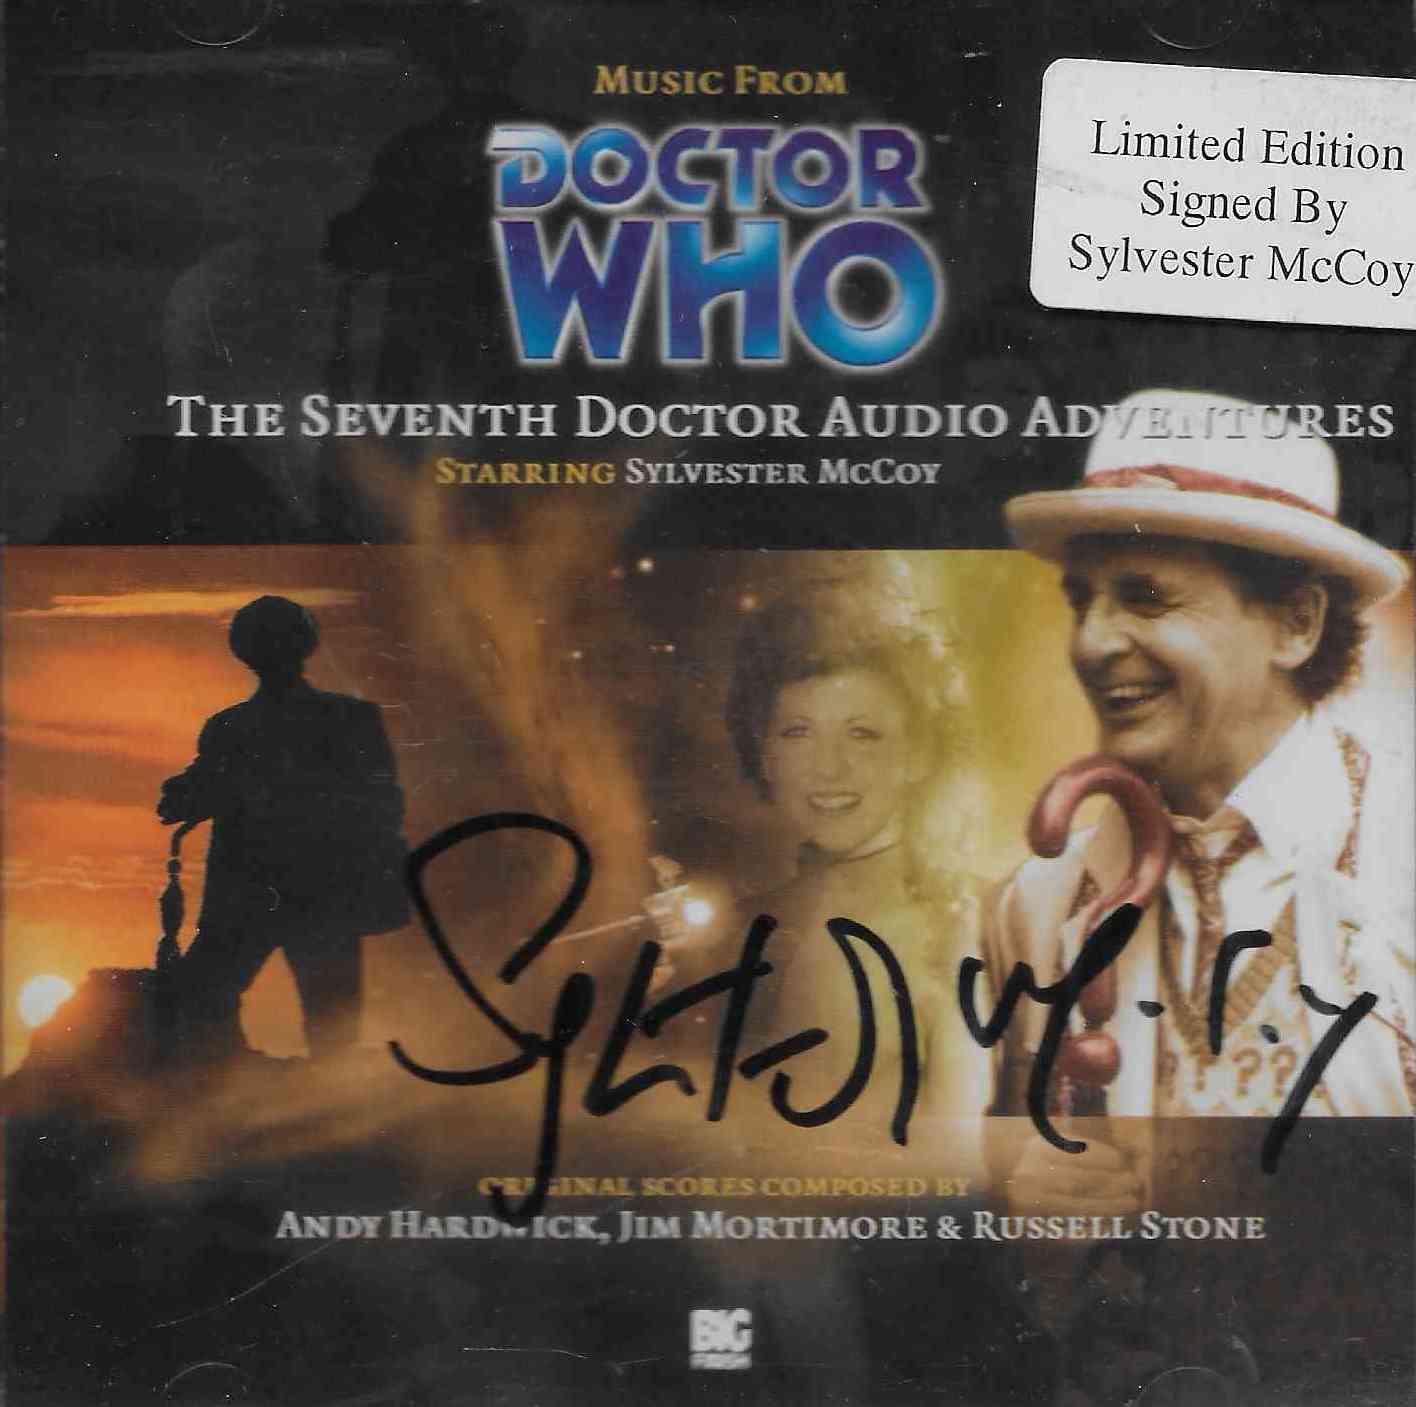 Picture of ISBN 1-84435-004-5 Doctor Who - The seventh Doctor audio adventures by artist Andy Hardwick / Jim Mortimore / Russell Stone from the BBC records and Tapes library